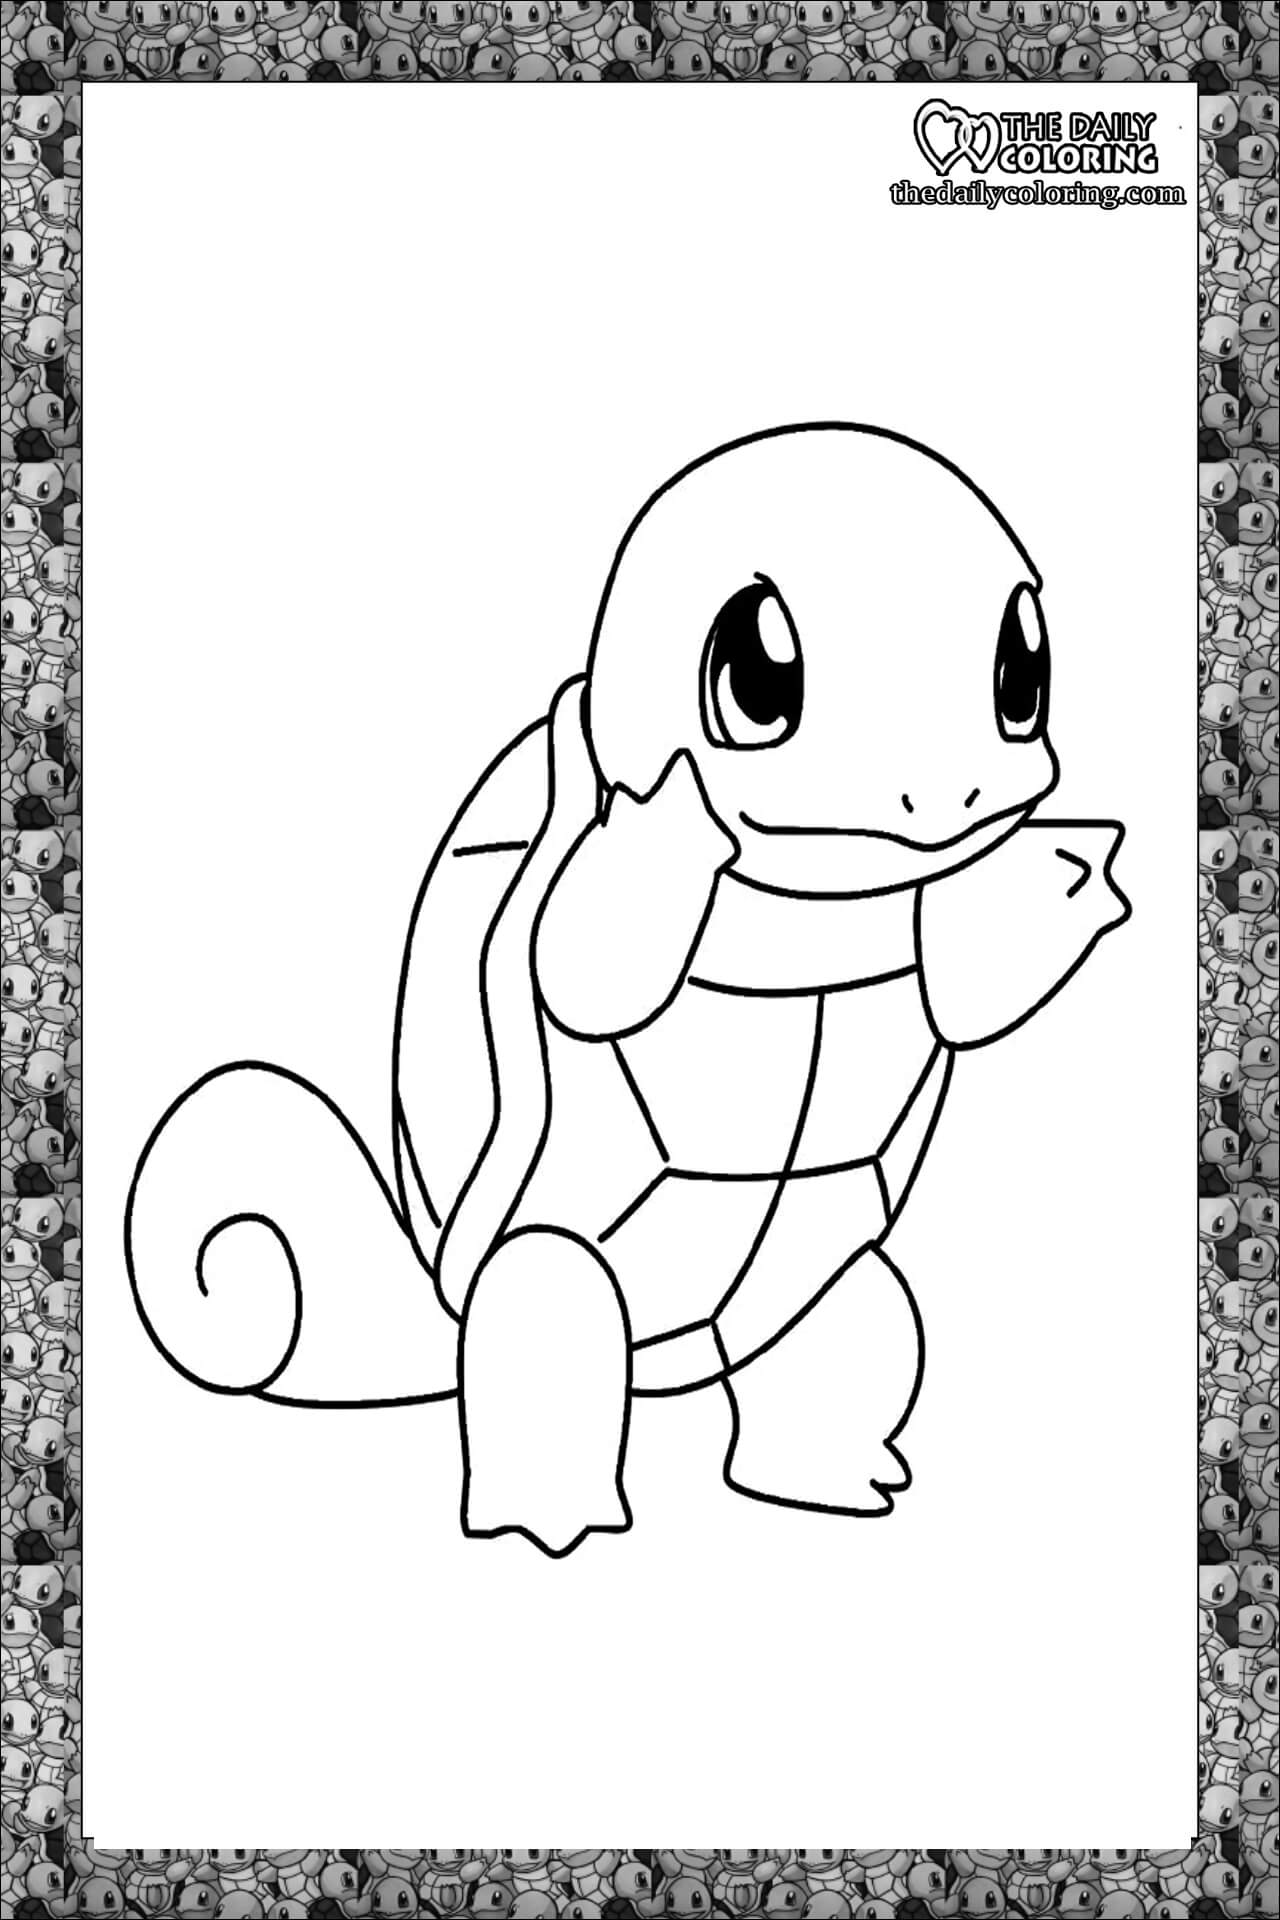 squirtle-coloring-page